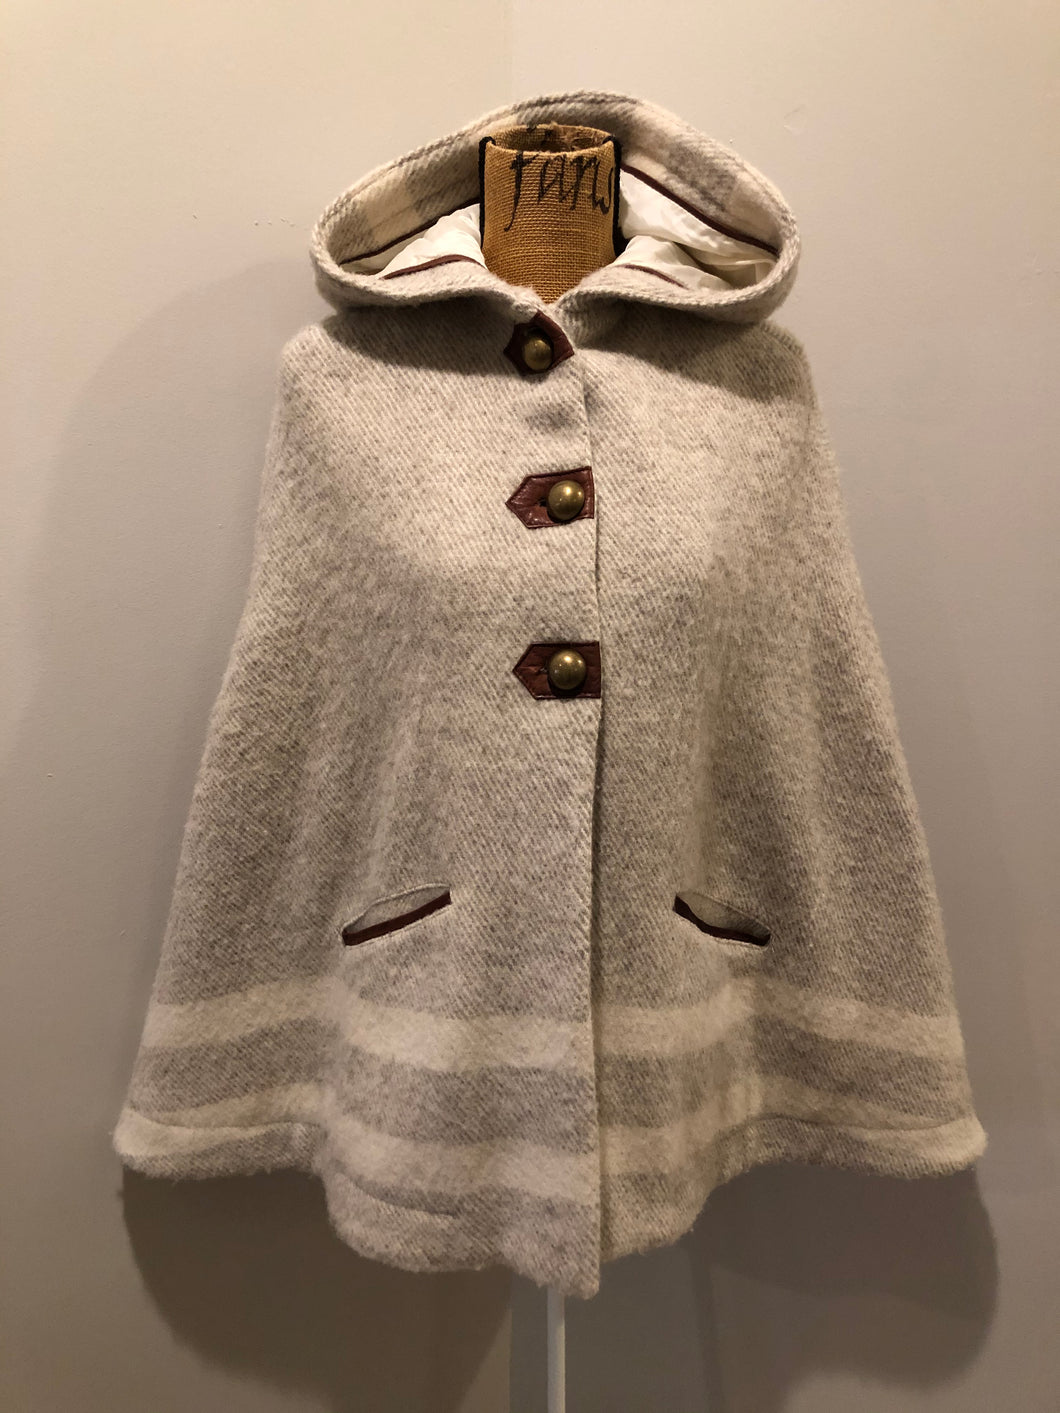 Kingspier Vintage - Tuck Shop Trading Co Dreamy Cape. Made in Canada with high quality wool from the Woolrich Mill, leather trim, round brass buttons and full lining. Size small.